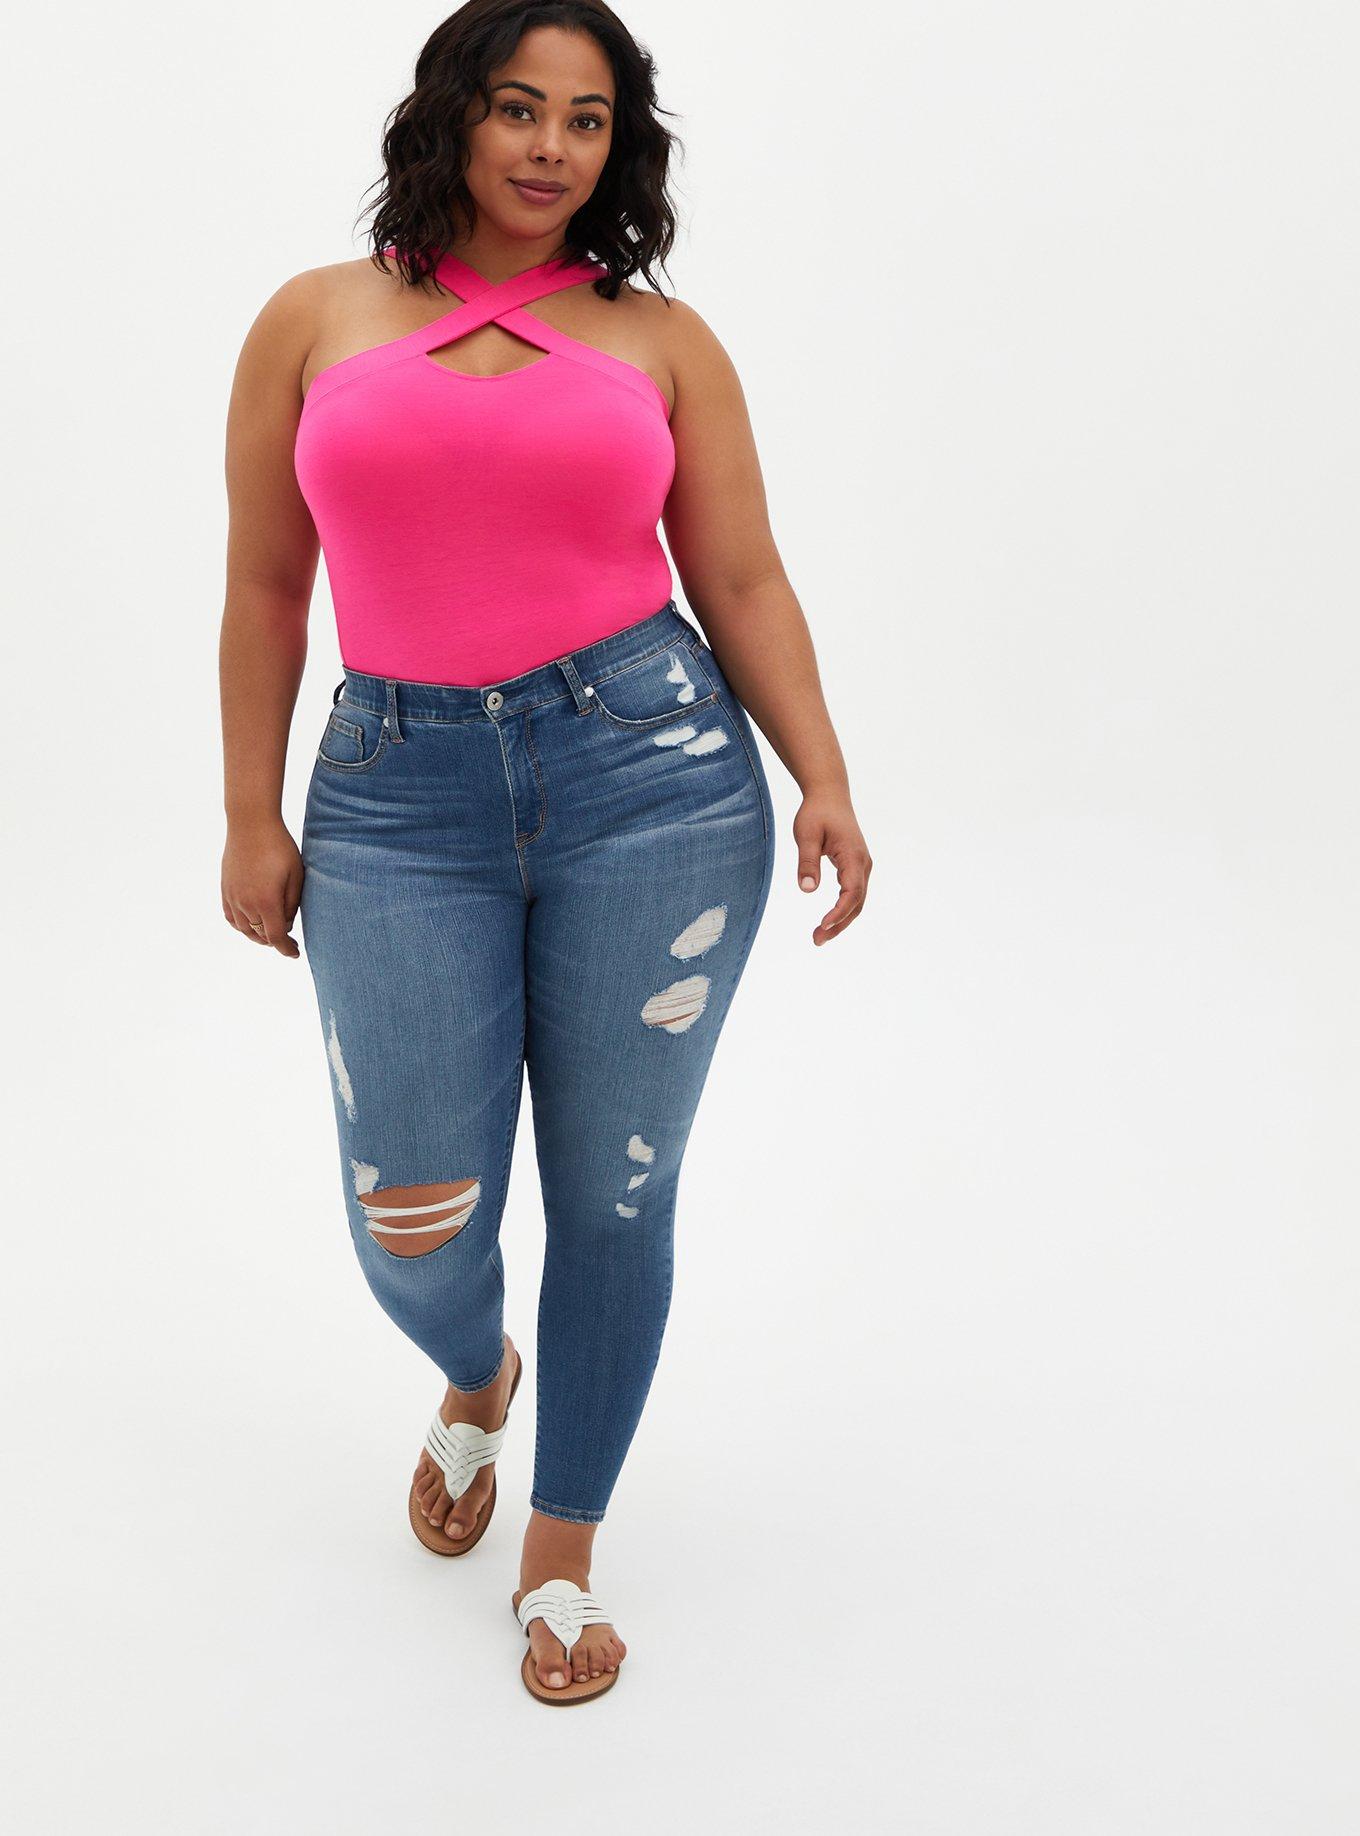 Torrid Plus Size Women's Clothing for sale in Town Pump, New York